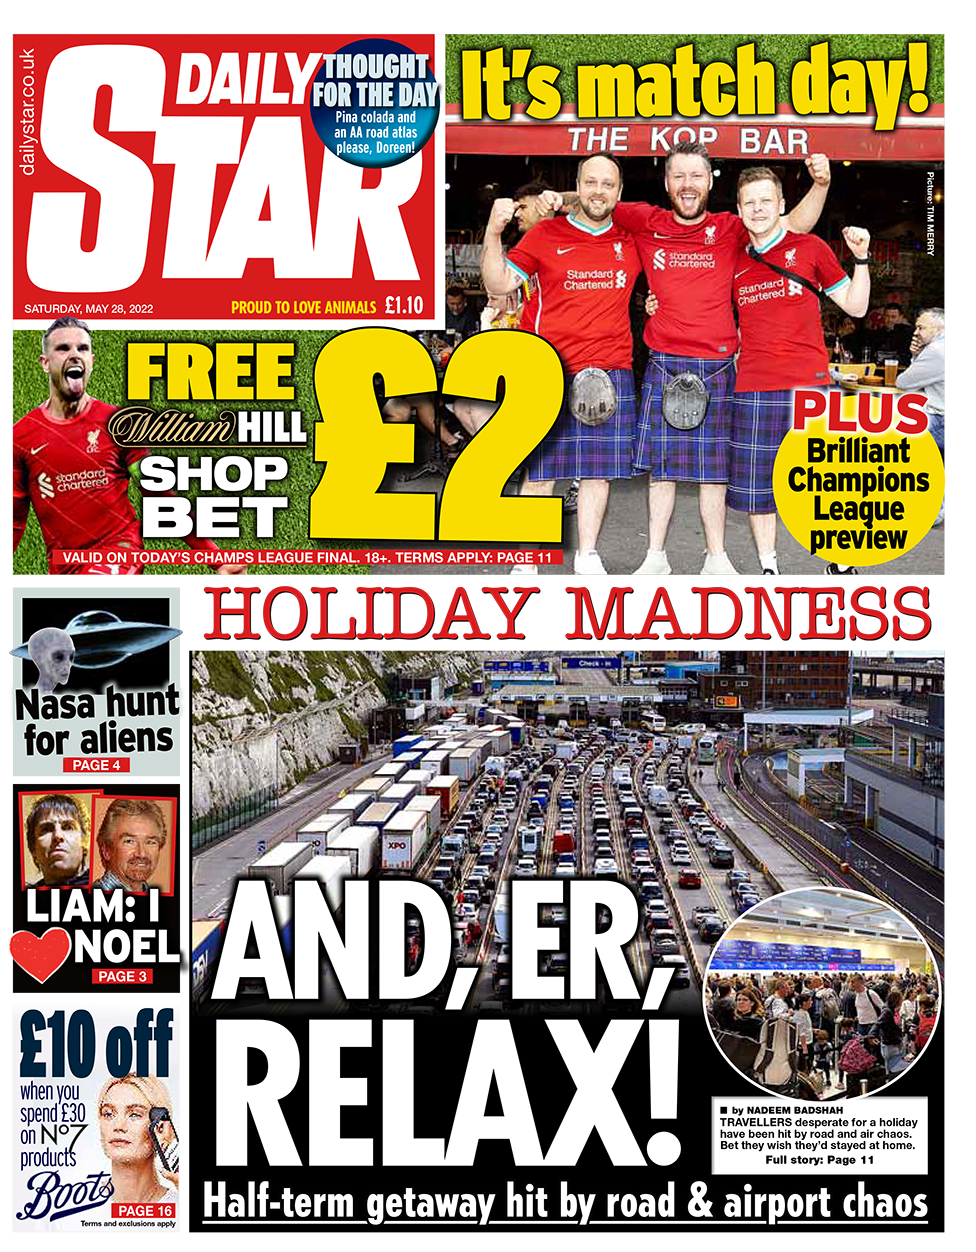 The Star's front page reports on travel disruption that has hit thousands trying to get away for half-term by road and air. A picture on the front page shows dozens of cars and lorries queuing to check in at the Port of Dover.